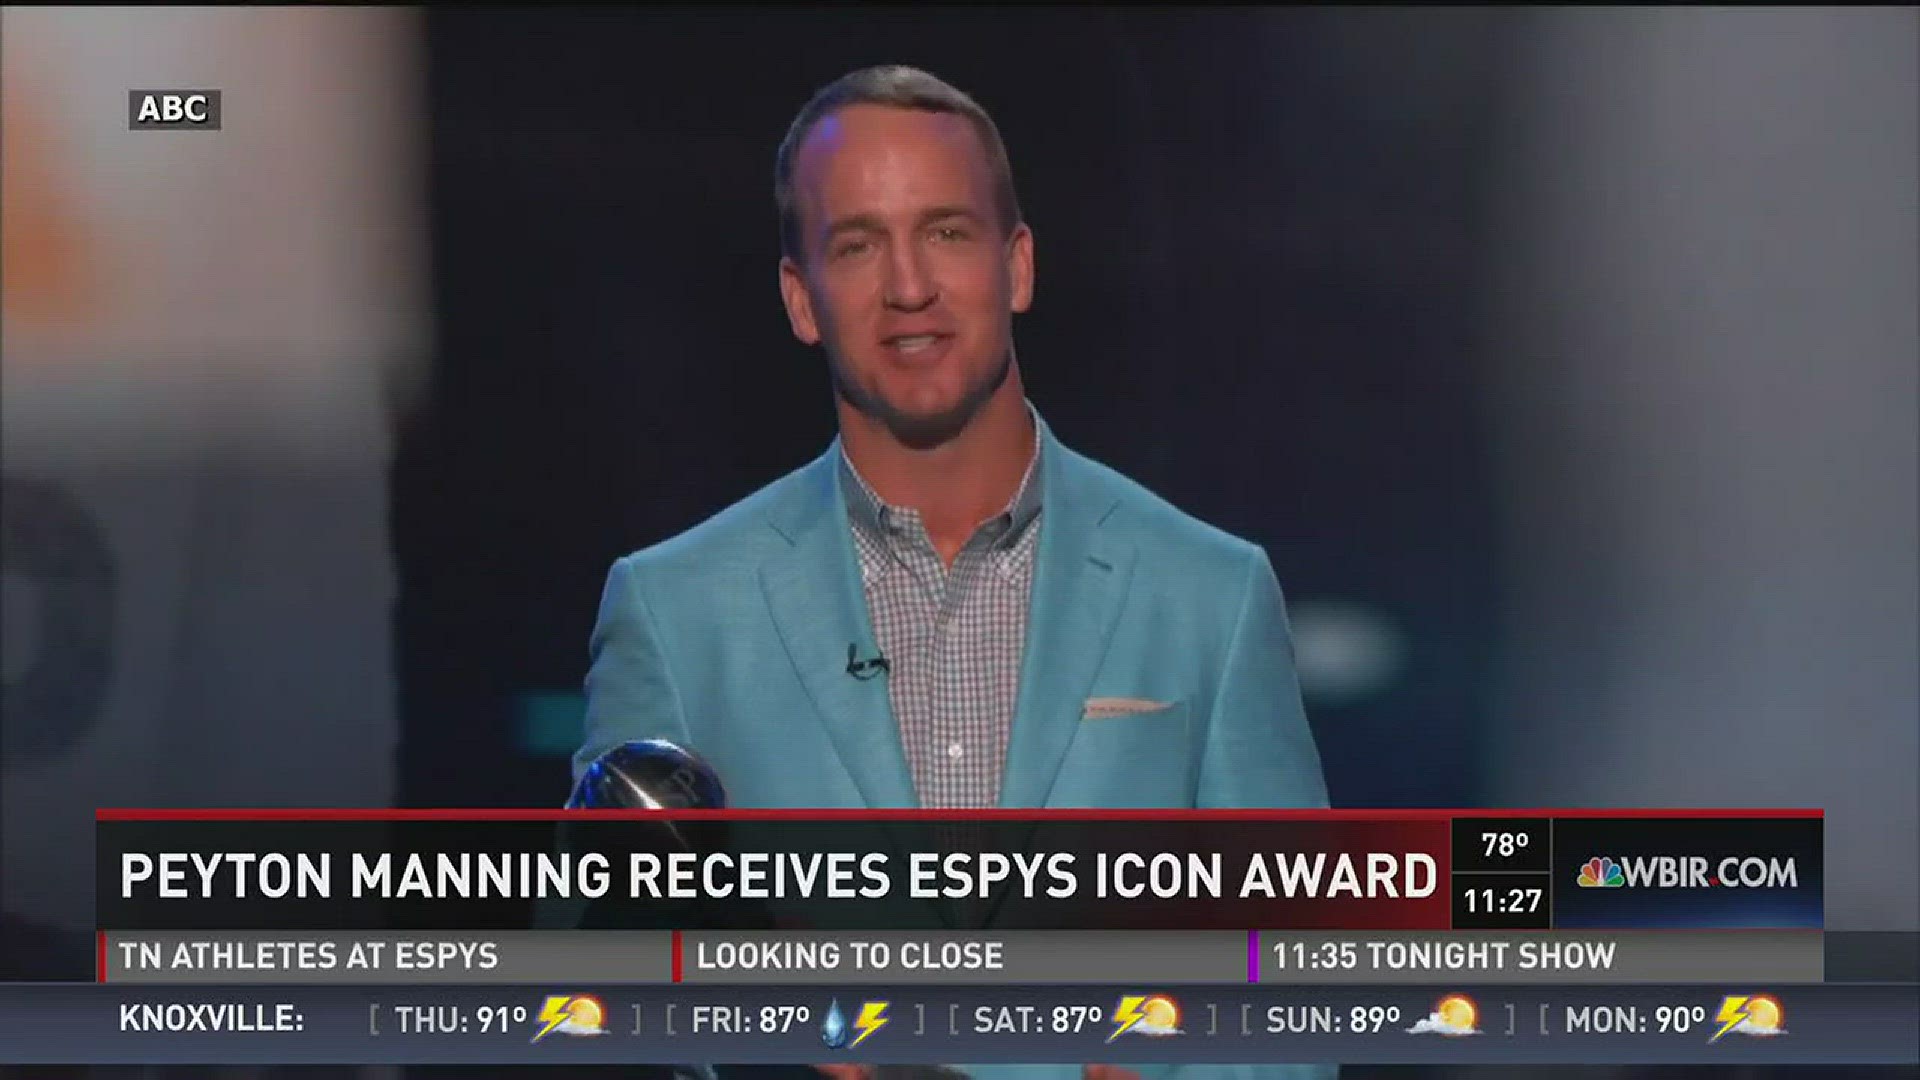 Peyton Manning, Abby Wambach and Kobe Bryant receive the Icon Award after retiring from their respective sports.